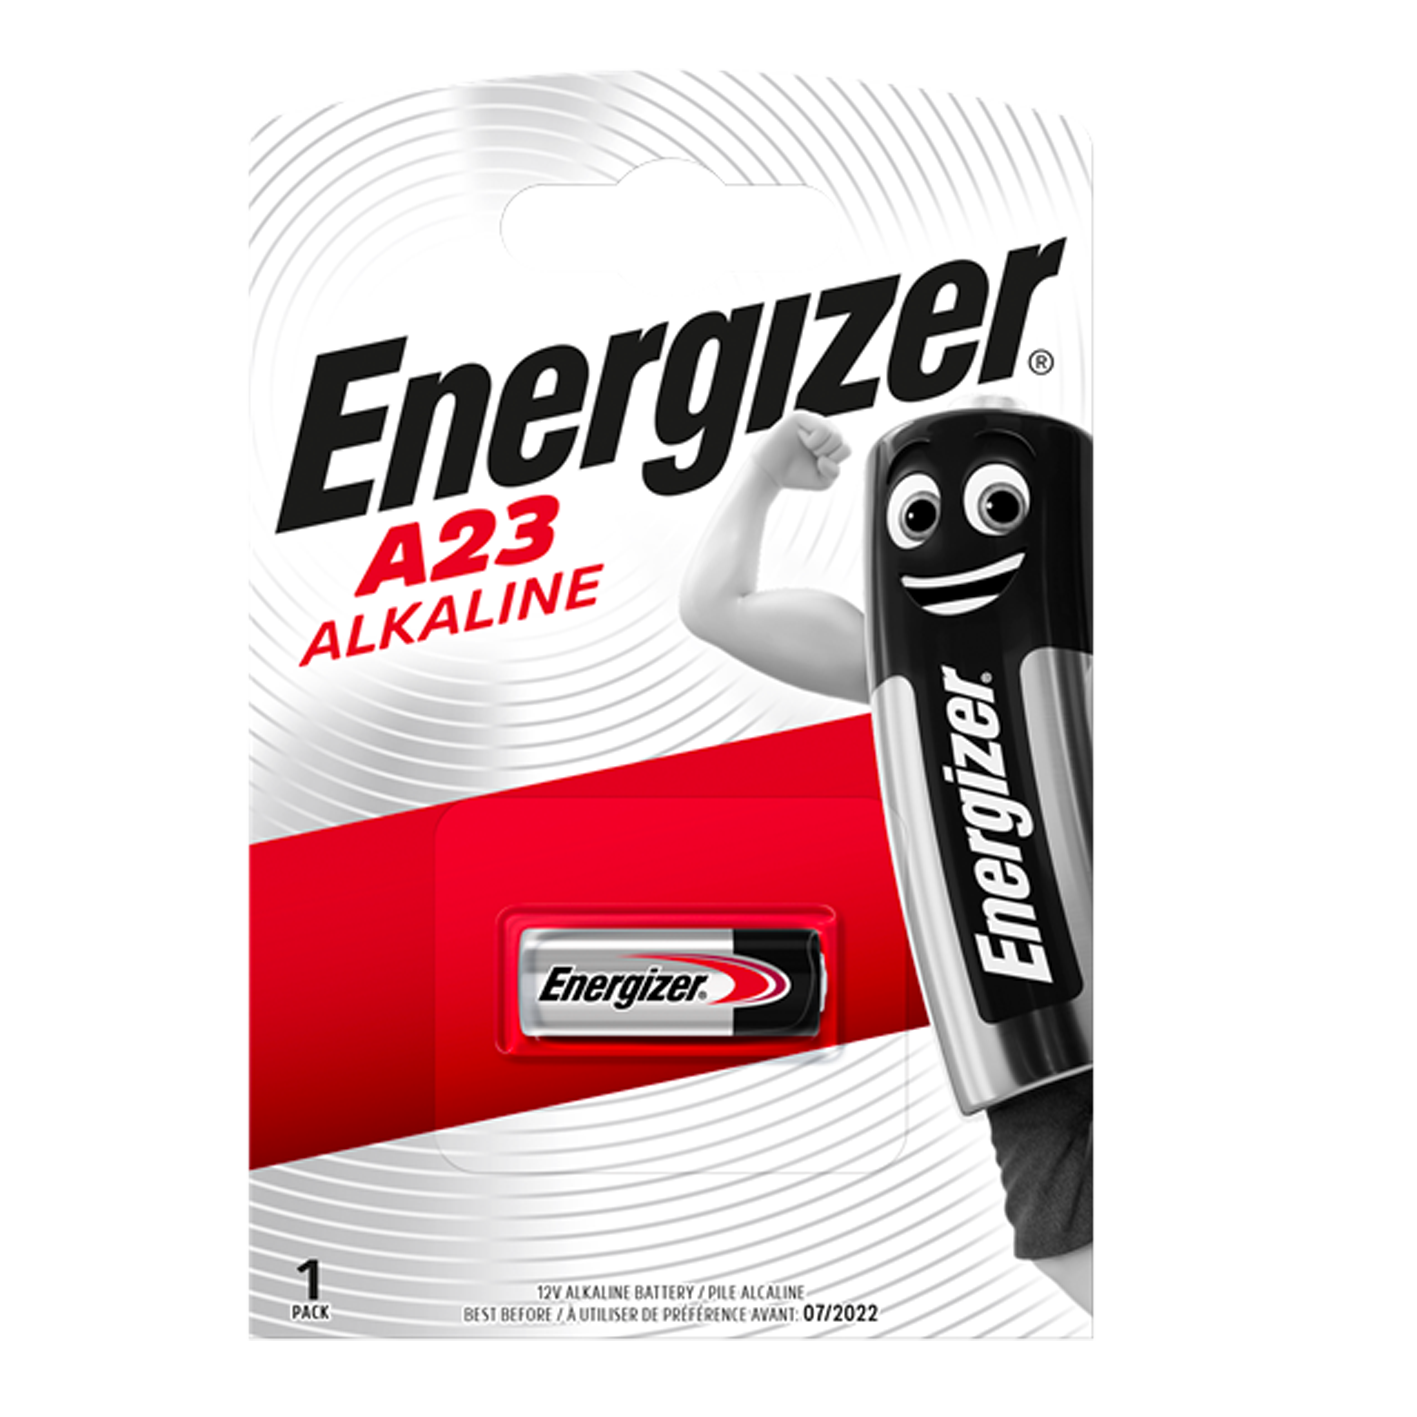 Energizer E23A/A23 Alkaline, Pack of 1